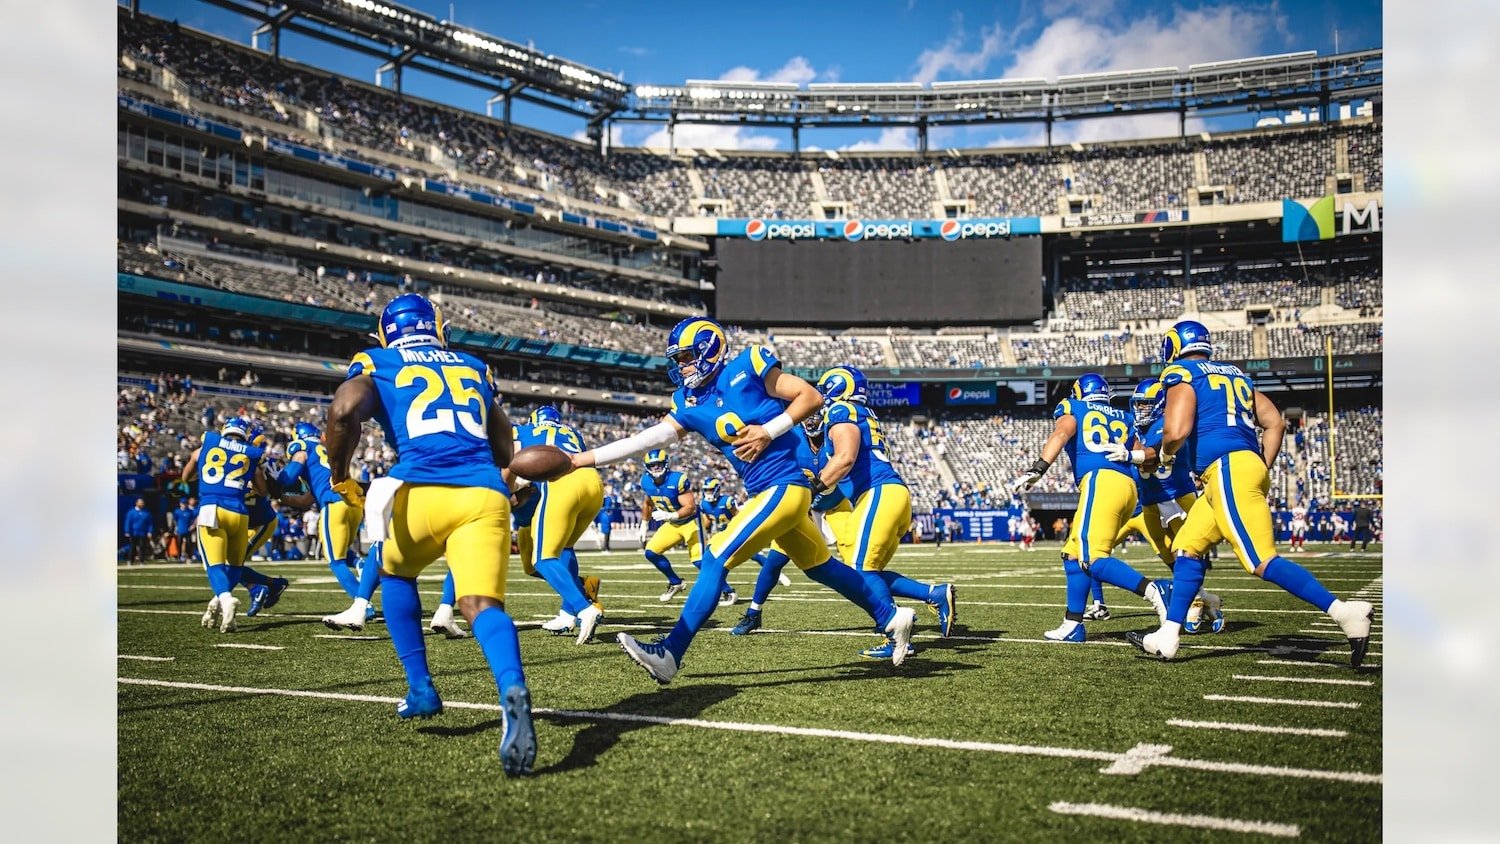 Los Angeles Rams Warmup At MetLife Stadium To Face The New York Giants. Photo Credit: Brevin Townsell | LA Rams